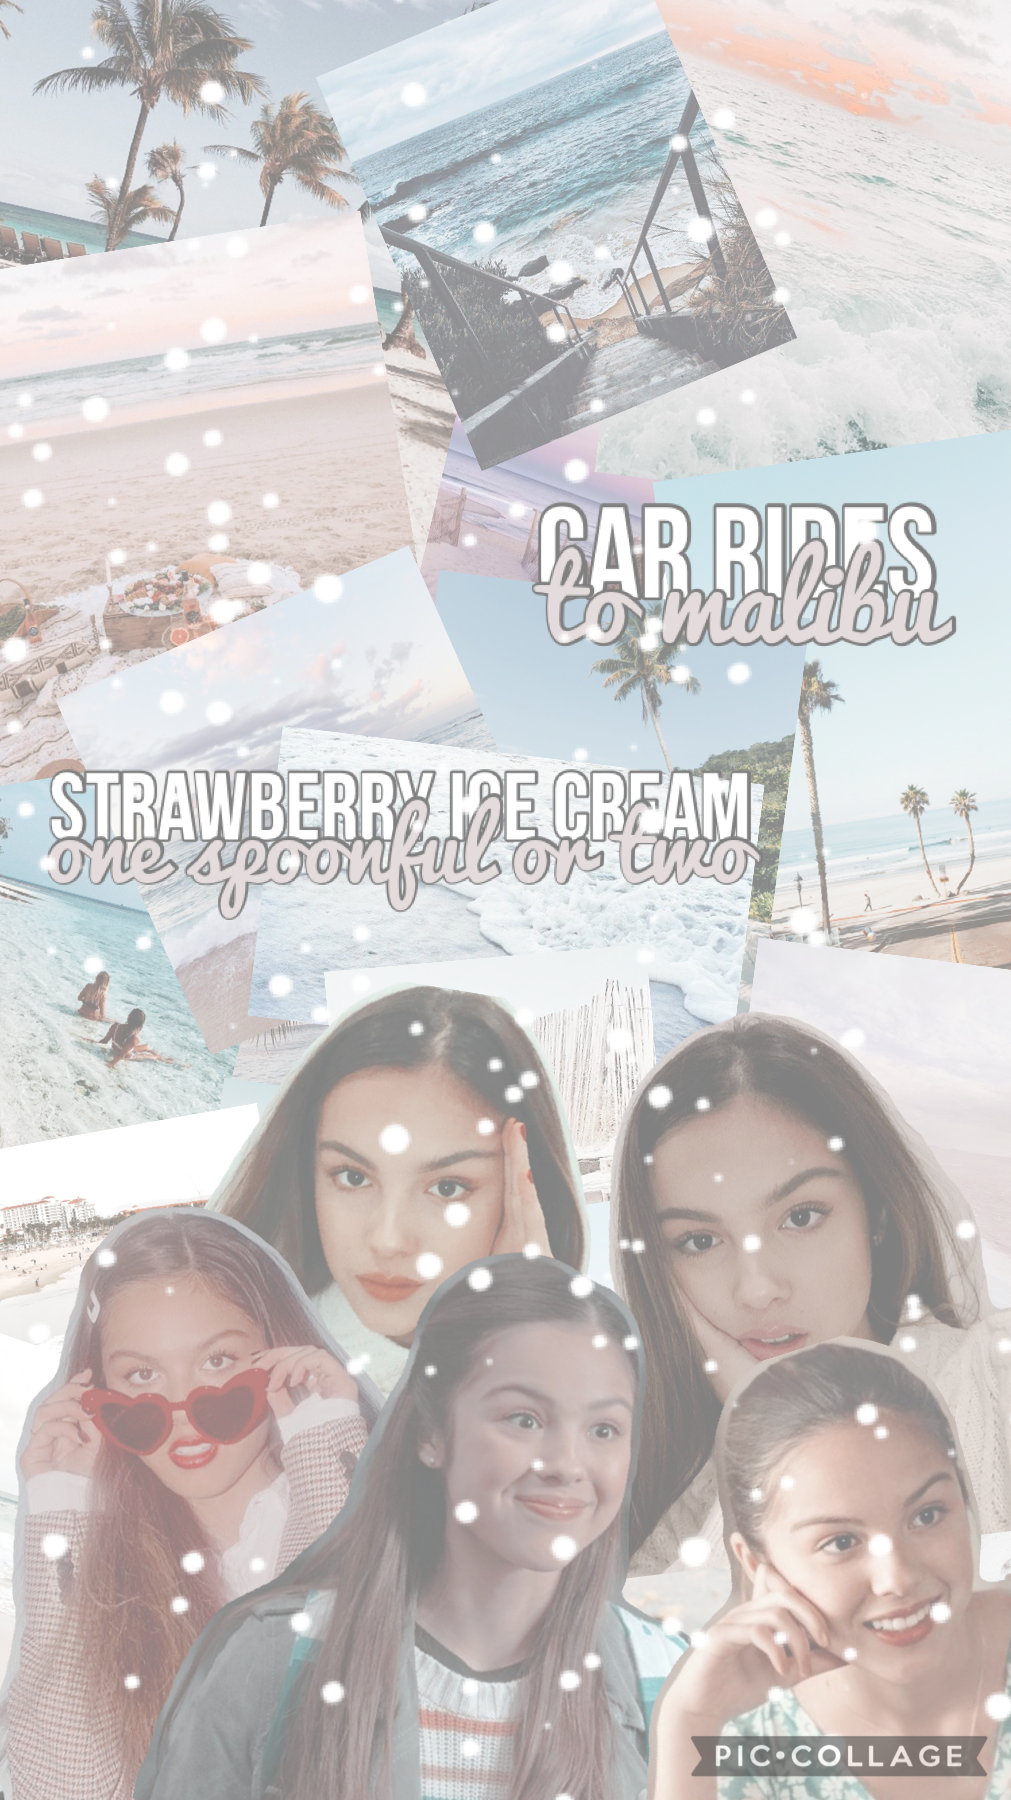 🎧tap🎧
Song ~ deja vu by Olivia Rodrigo
Hello sunshiners!!
i’m starting to experiment with my fonts so i might be doing these type of collages from now on
make sure to check out my contest!!
- xox sunshine-daydreams 🤍